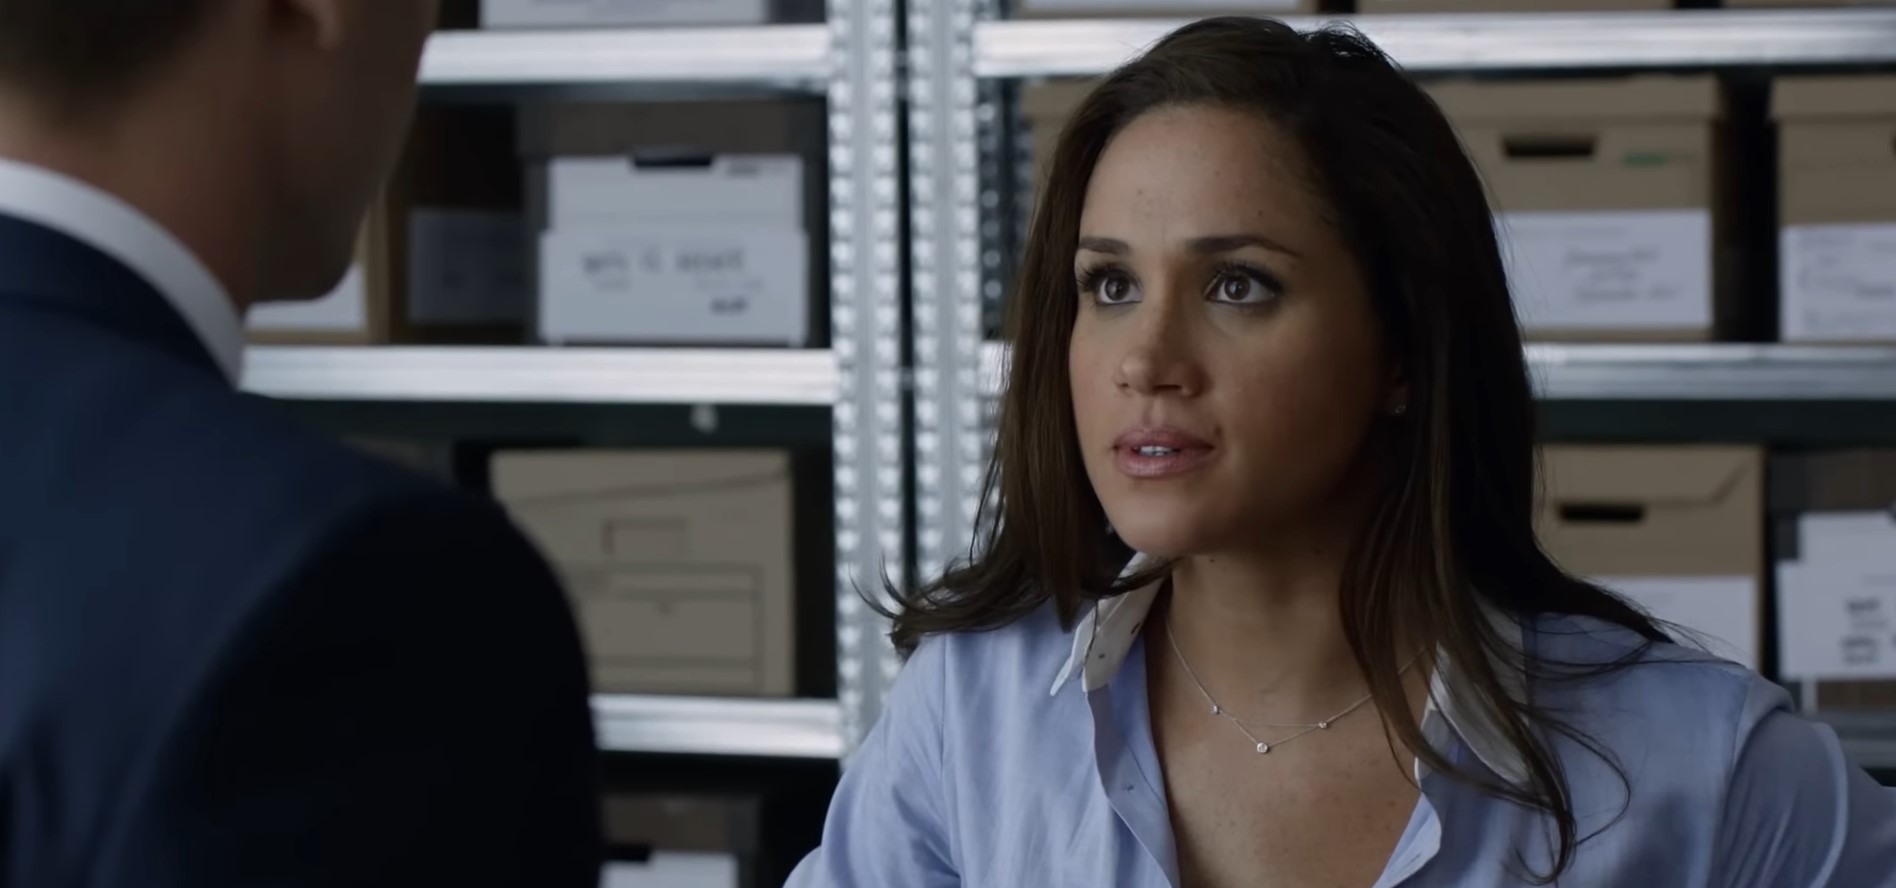 Why Did Meghan Markle Leave Suits? Does Rachel Come Back?